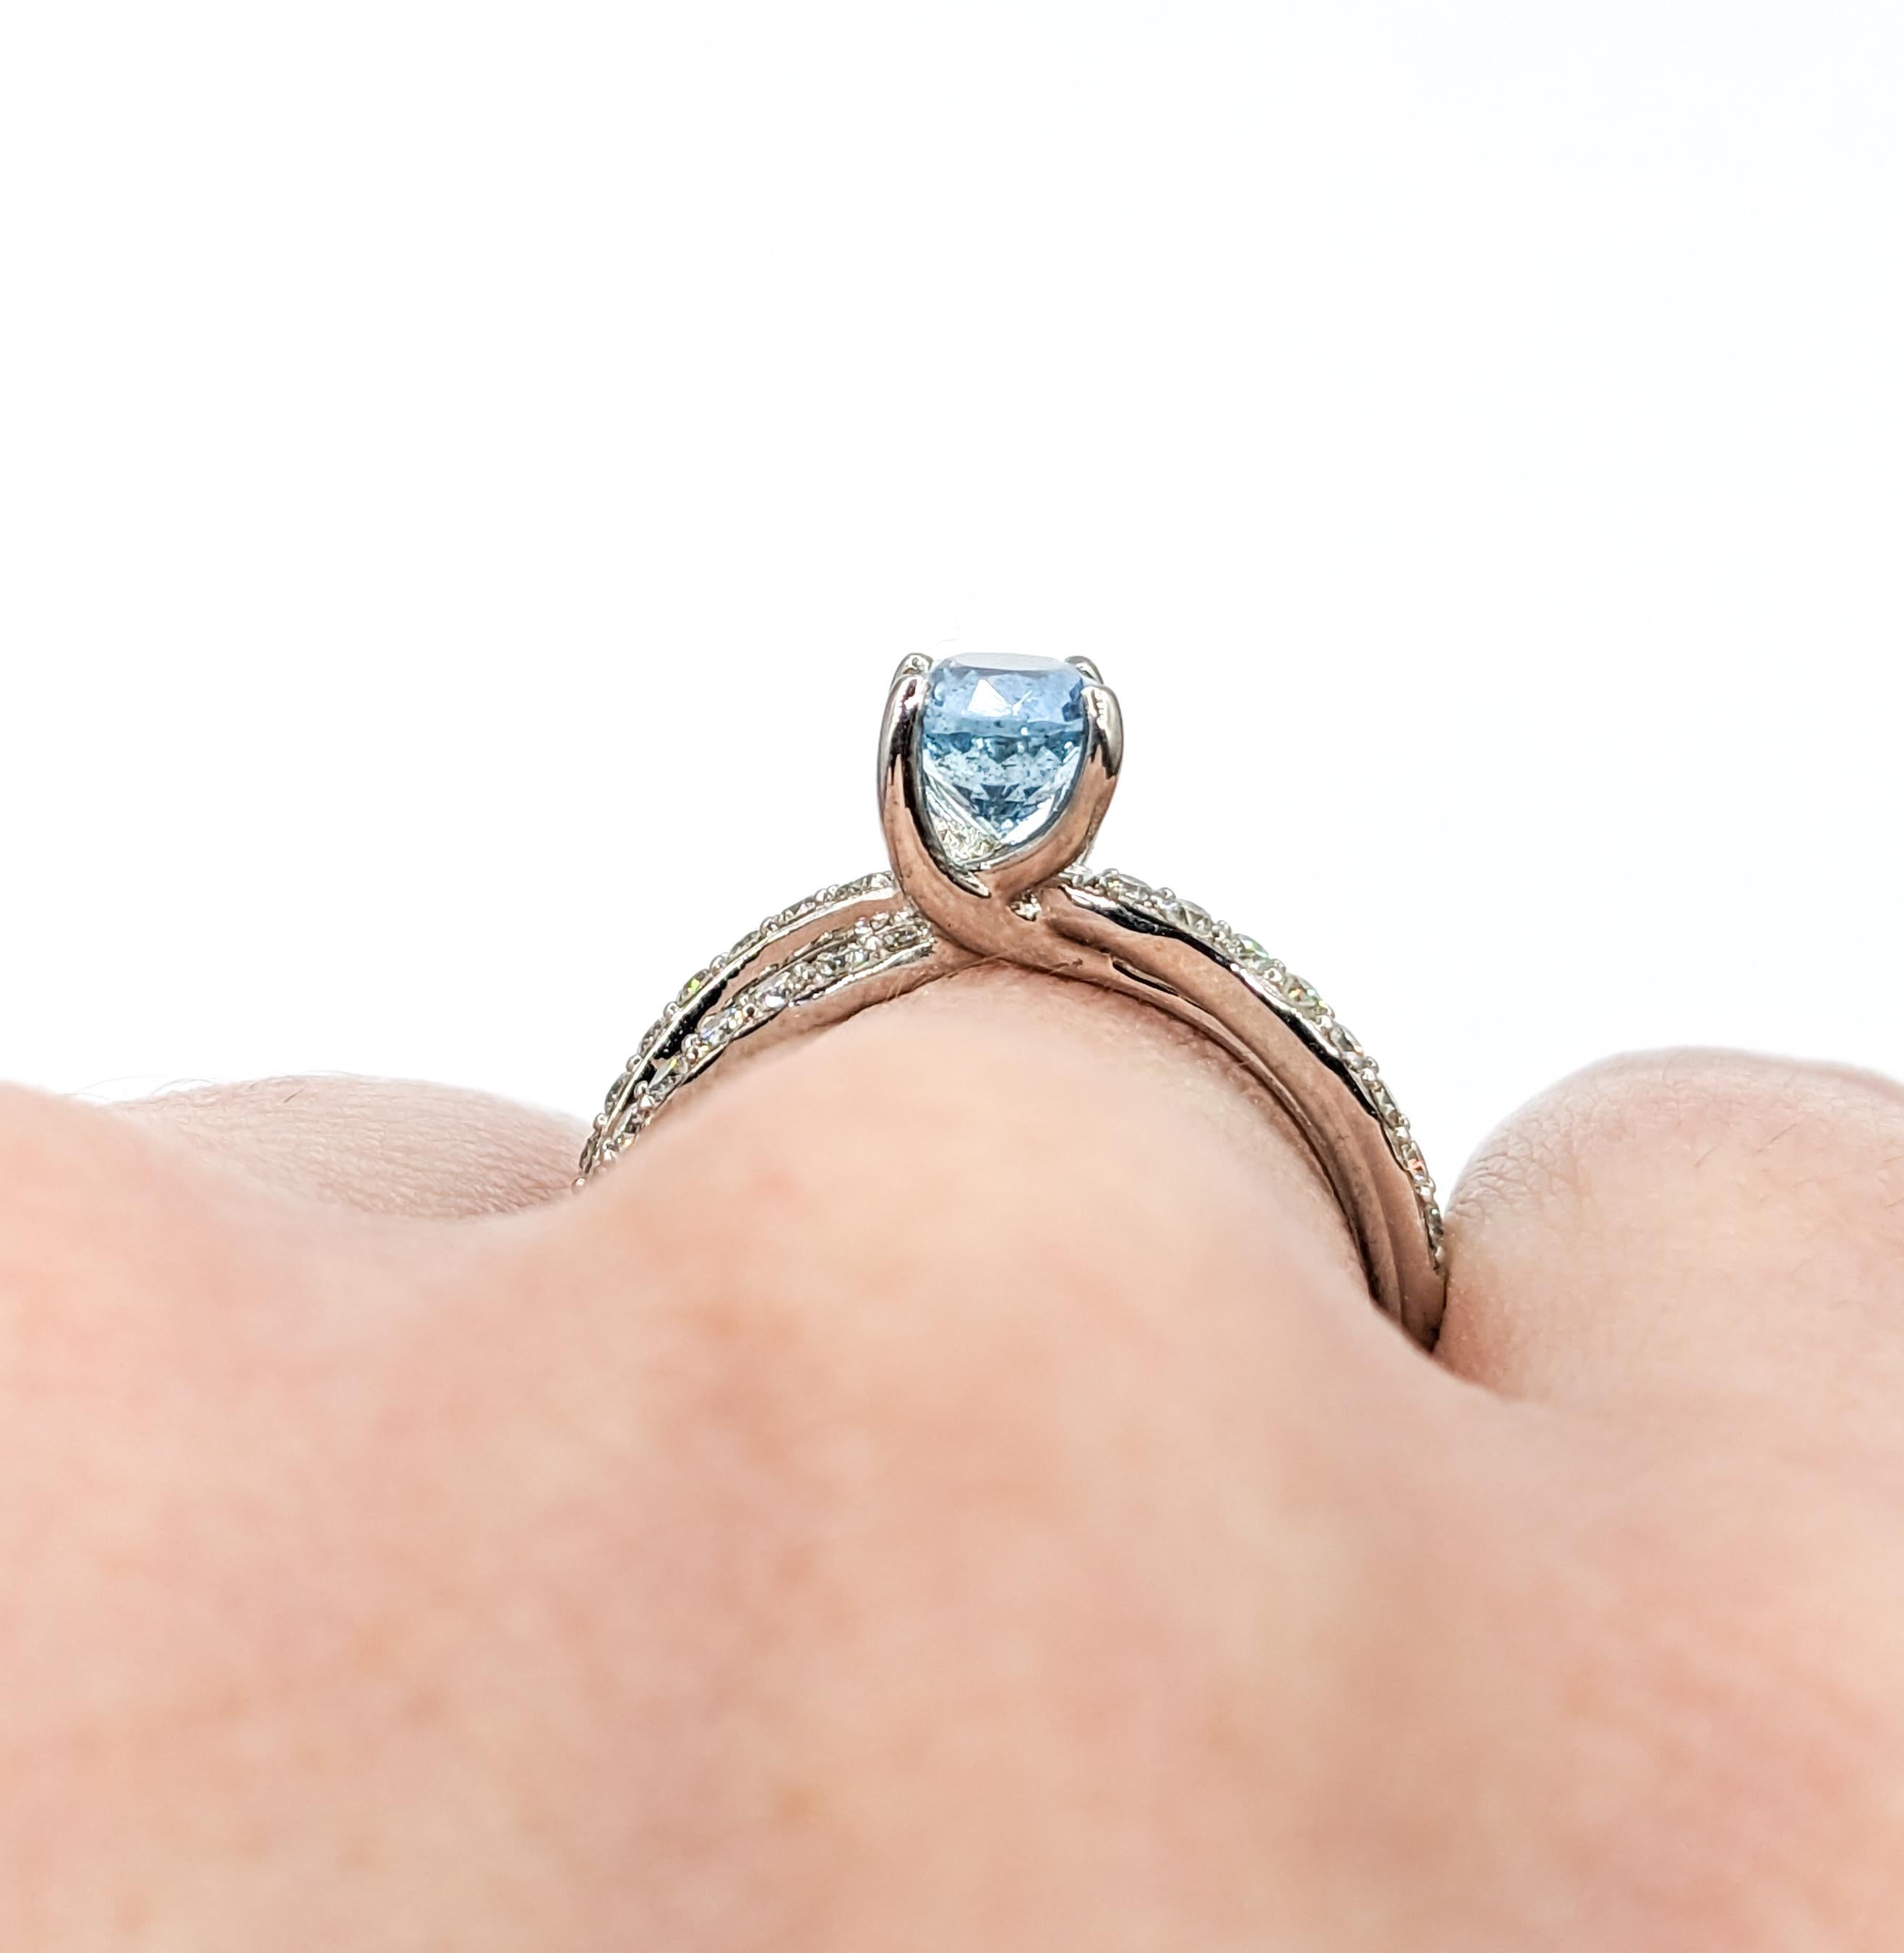 Aquamarine & Diamond Ring in 18k White Gold In Excellent Condition For Sale In Bloomington, MN